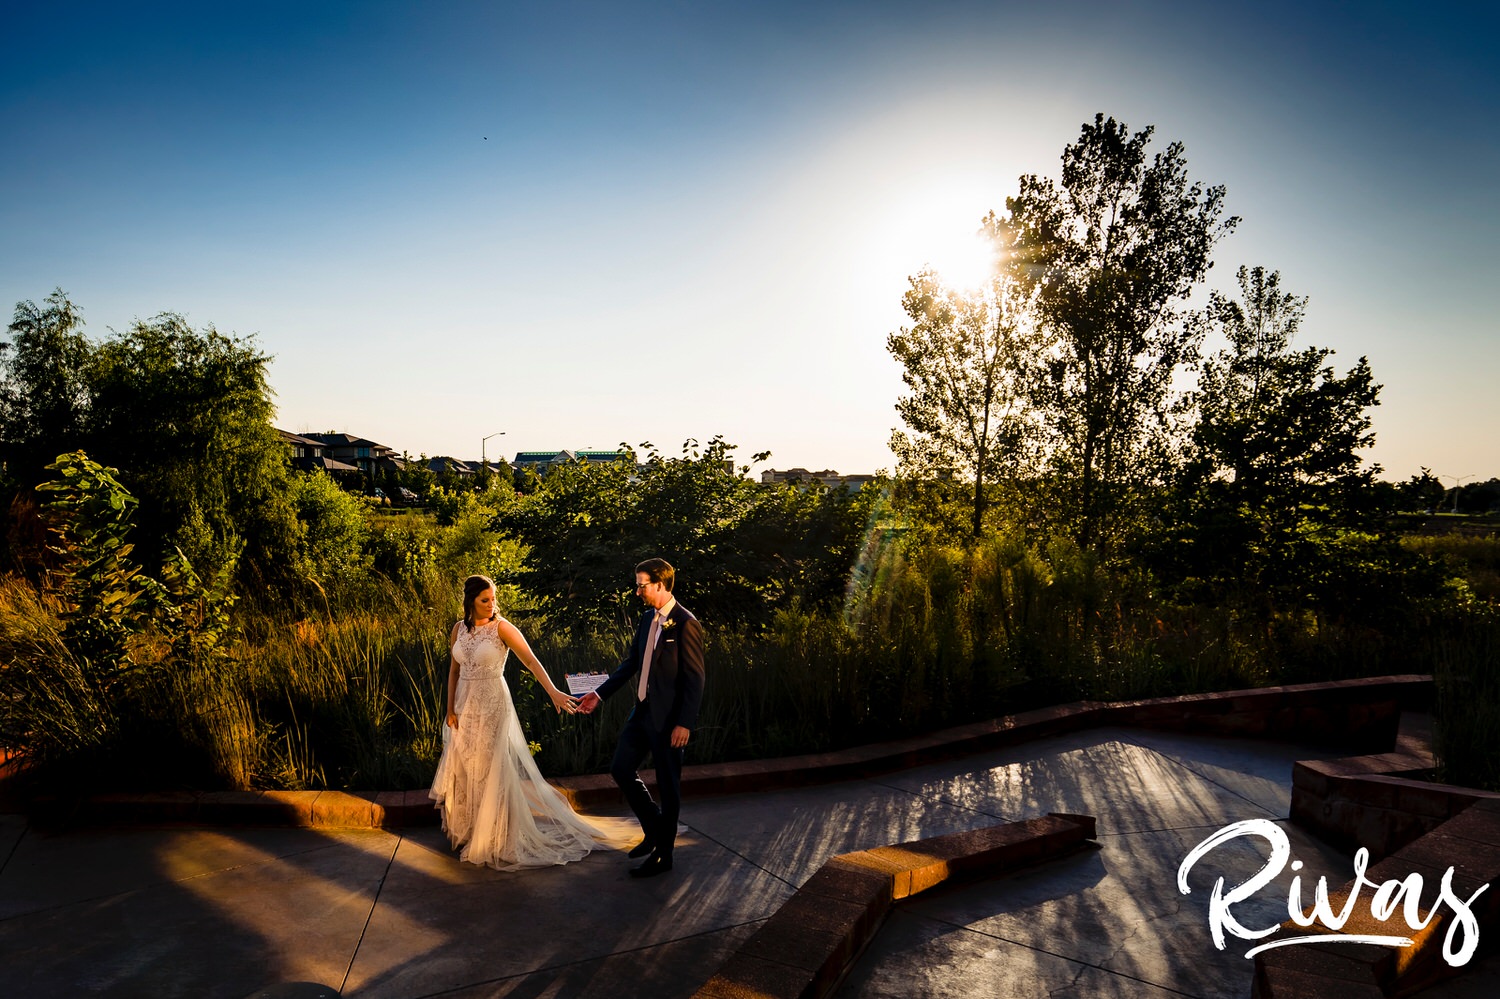 A wide, candid picture of a bride and groom walking hand-in-hand across the back patio of The Museum at Prairiefire on their wedding day. 